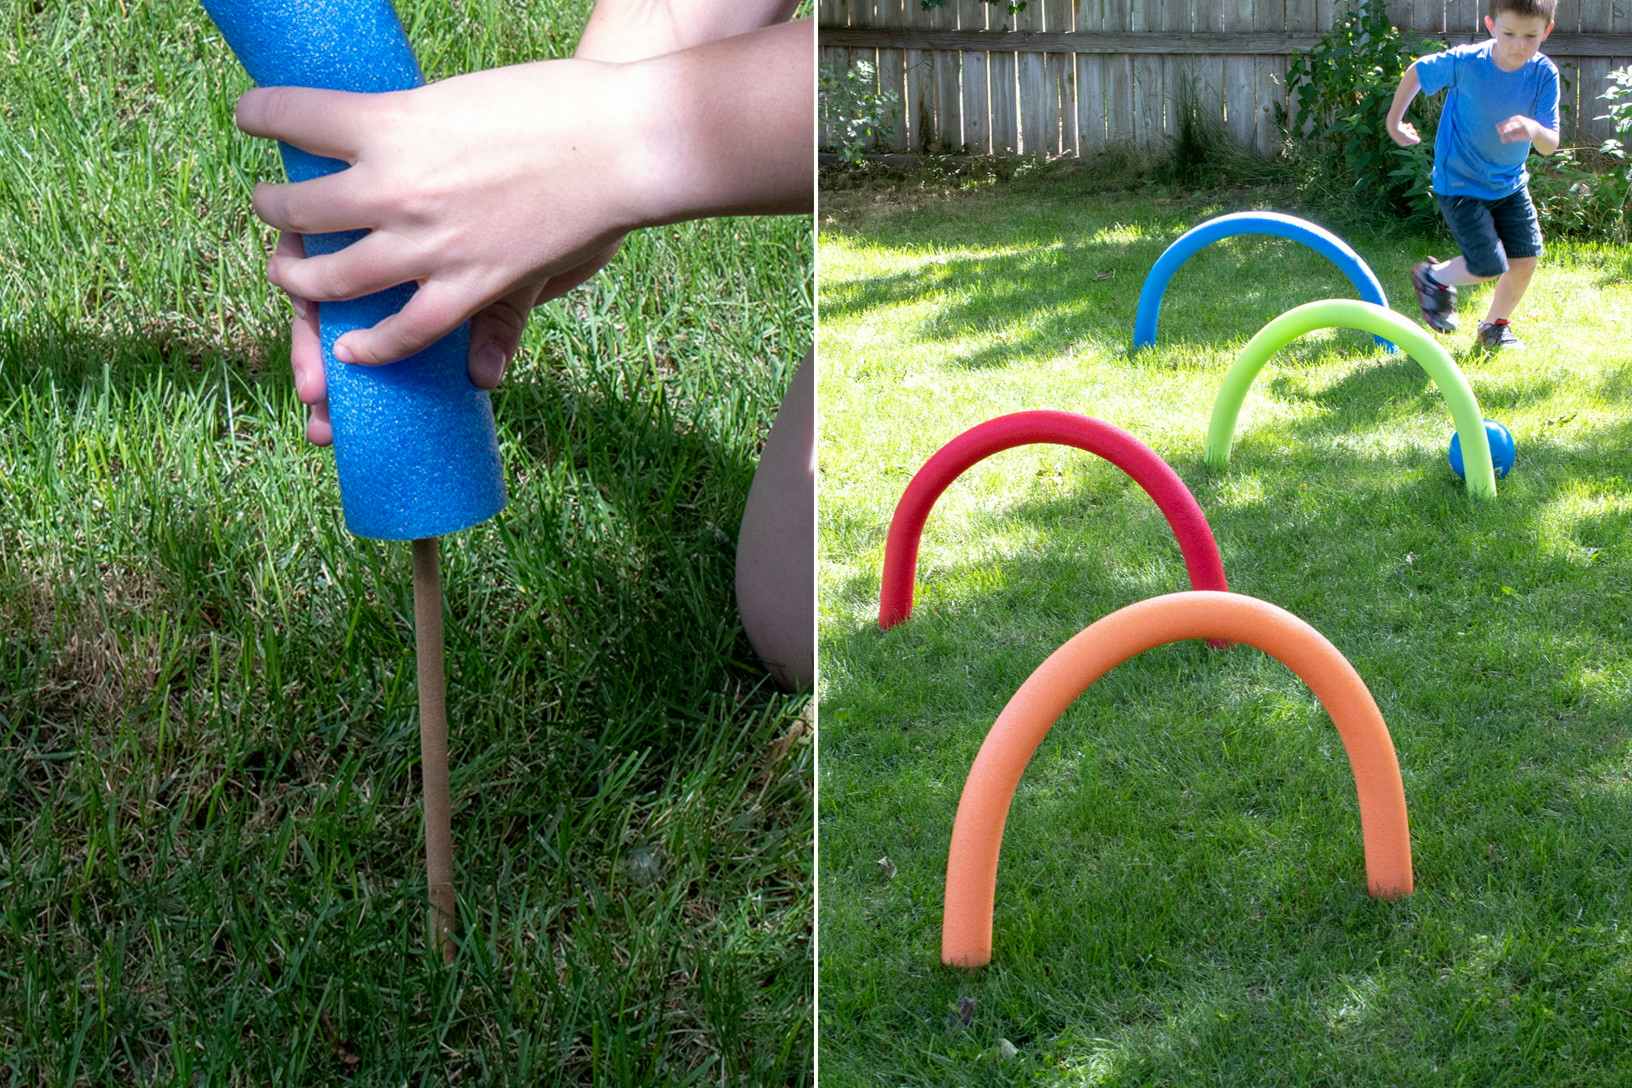 A person's hands placing a pool noodle onto a dowel sticking out of the ground, and a child kicking a ball through DIY pool noodle obstacles on a lawn.